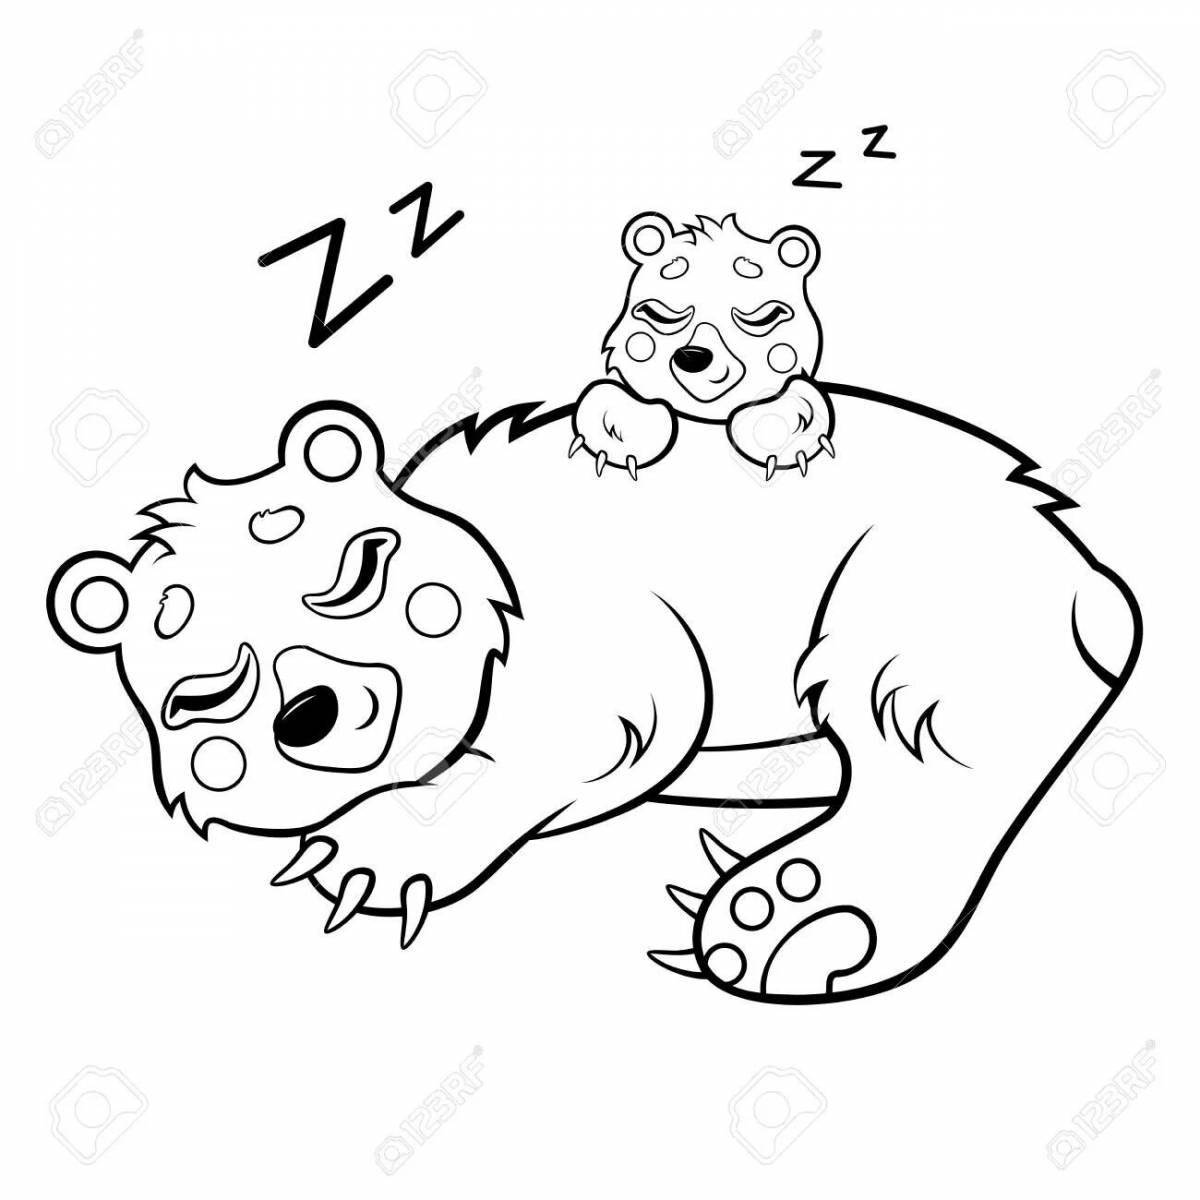 Snoozy bear sleeping in a den coloring page